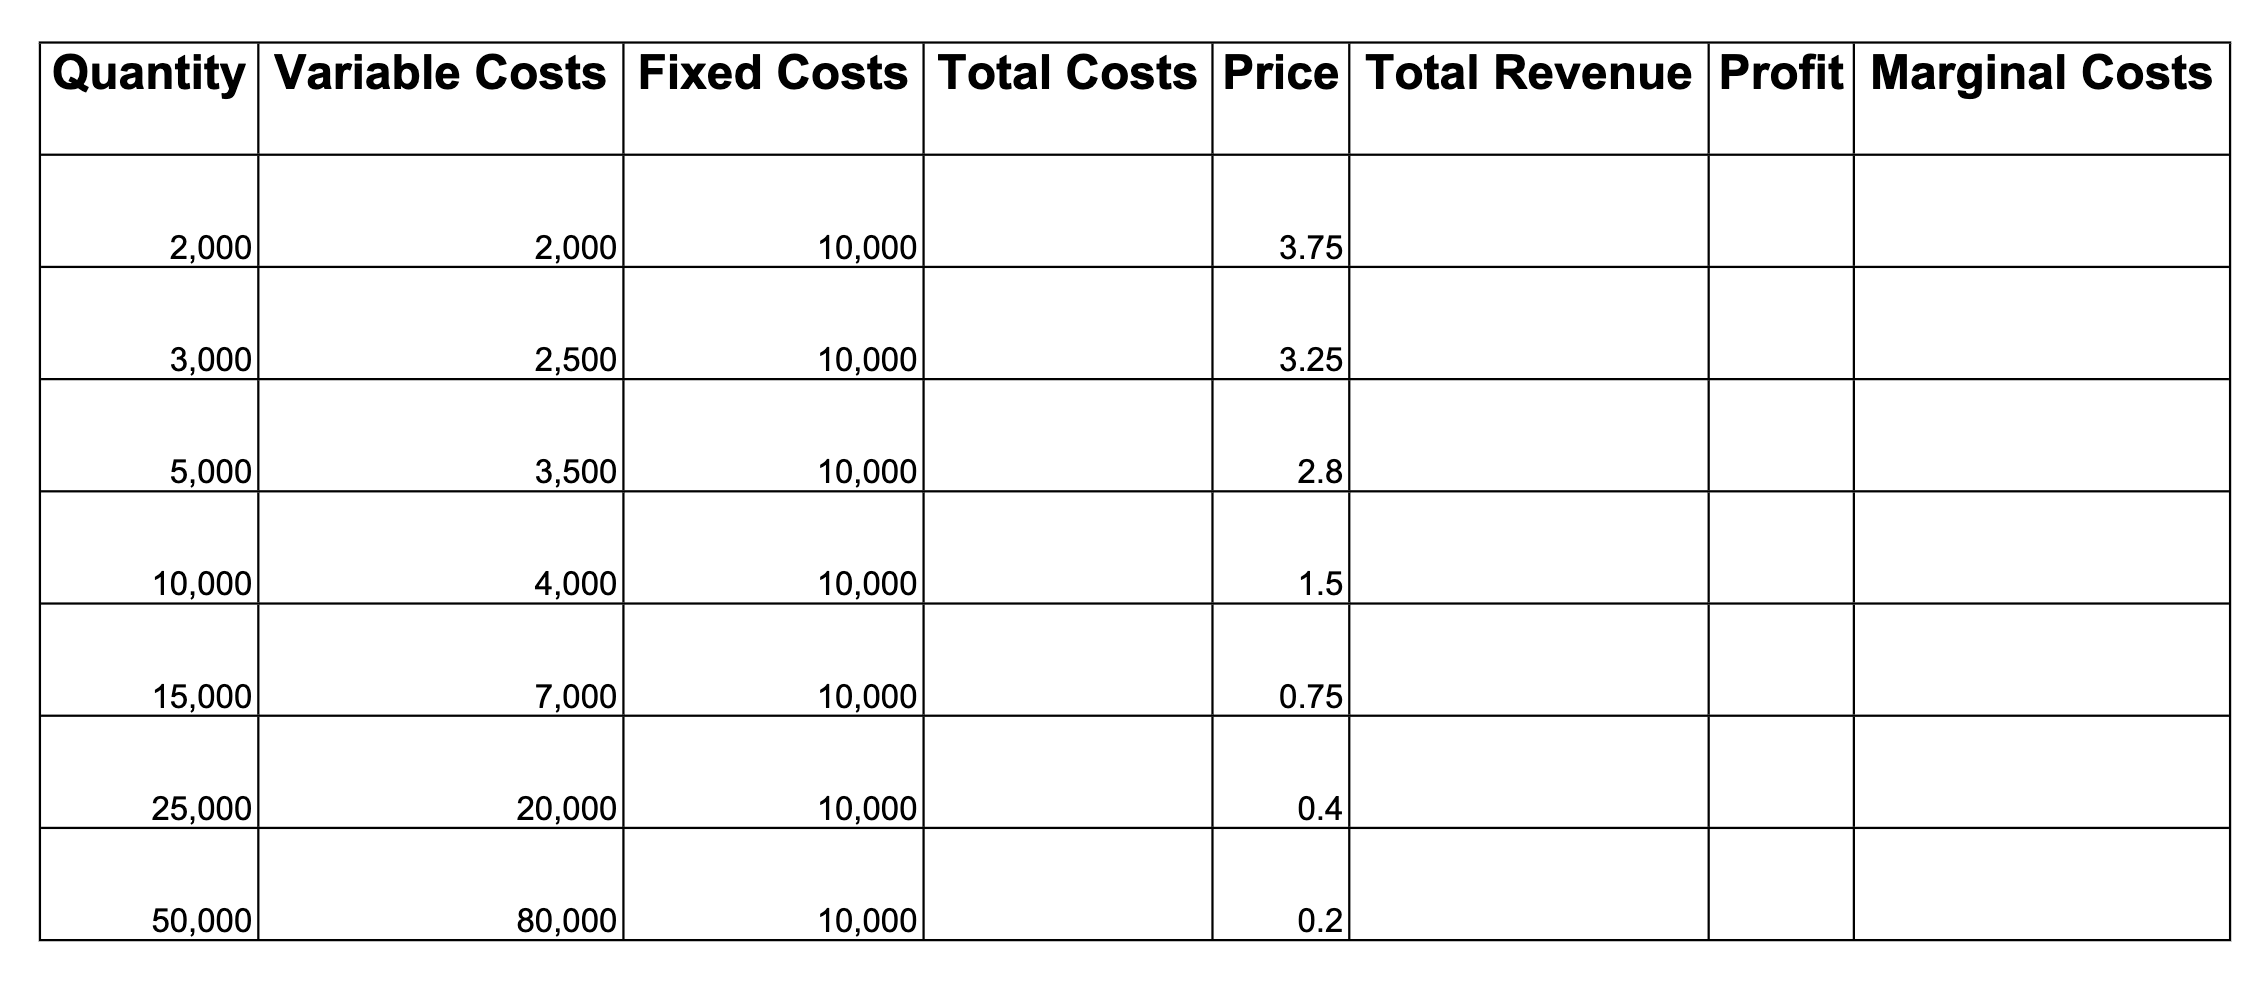 Quantity Variable Costs Fixed Costs Total Costs Price Total Revenue Profit Marginal Costs
2,000
2,000
10,000
3.75
3,000
2,500